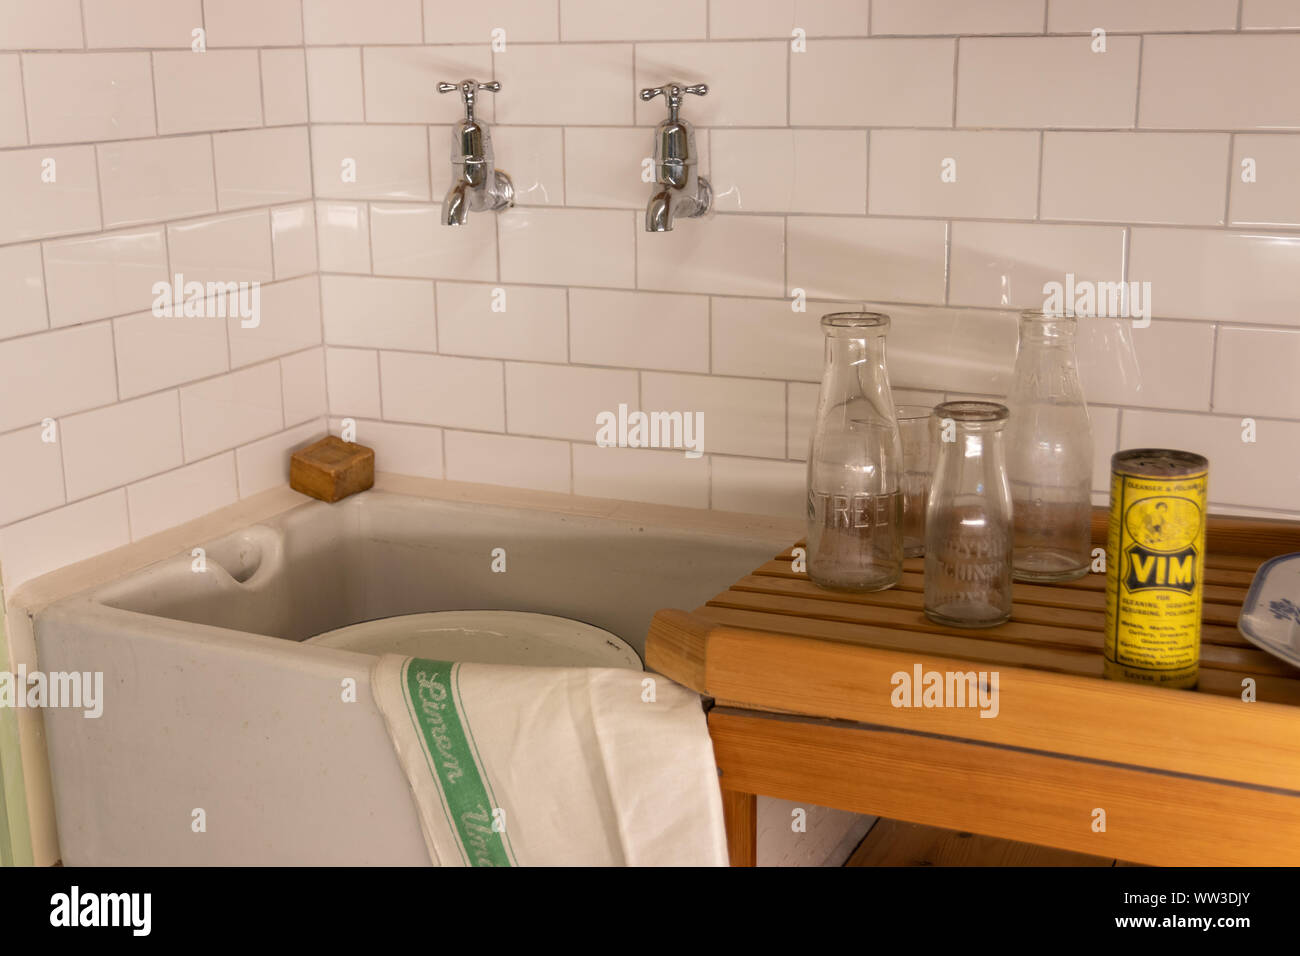 A scene from a 1960's kitchen with tiles, a butler sink, wooden draining board and Vim cleaning powder Stock Photo